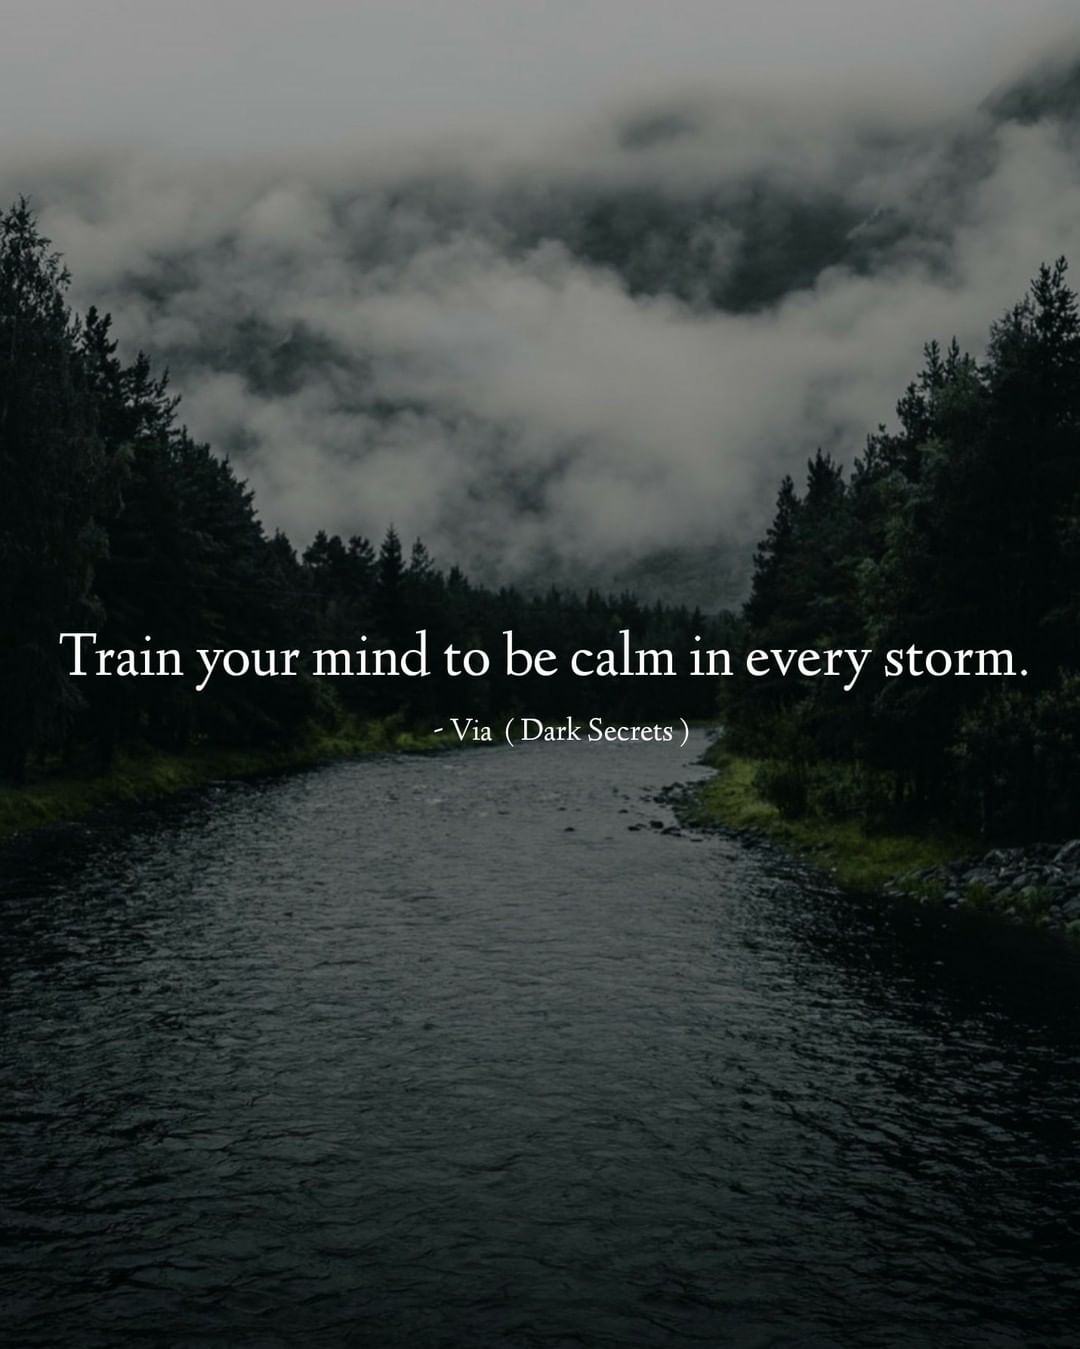 Train your mind to be calm in every storm.